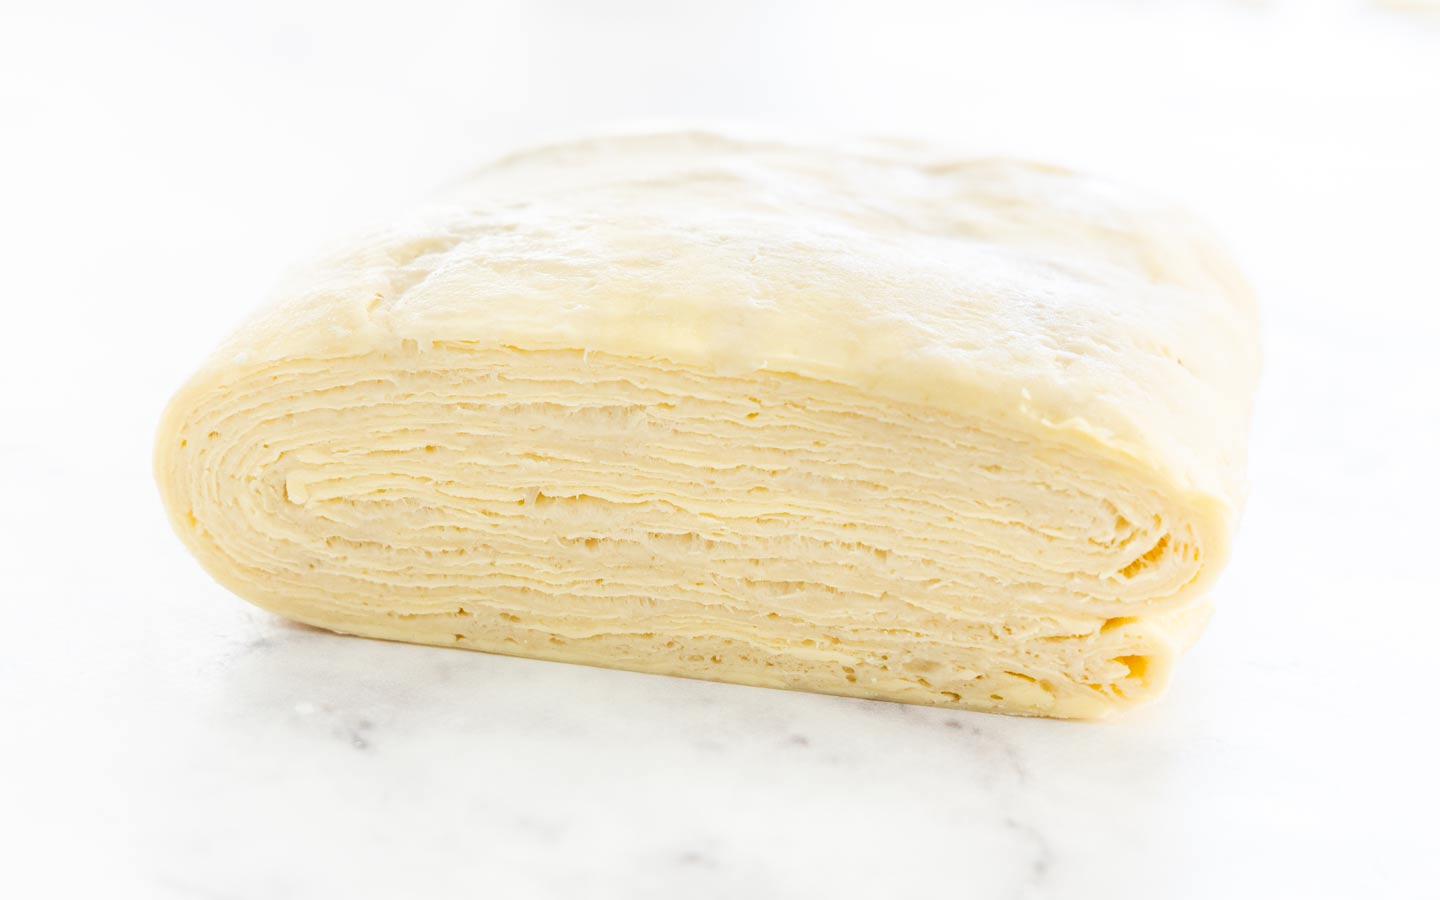 Closeup of the side profile of the pastry, showing all the layers.